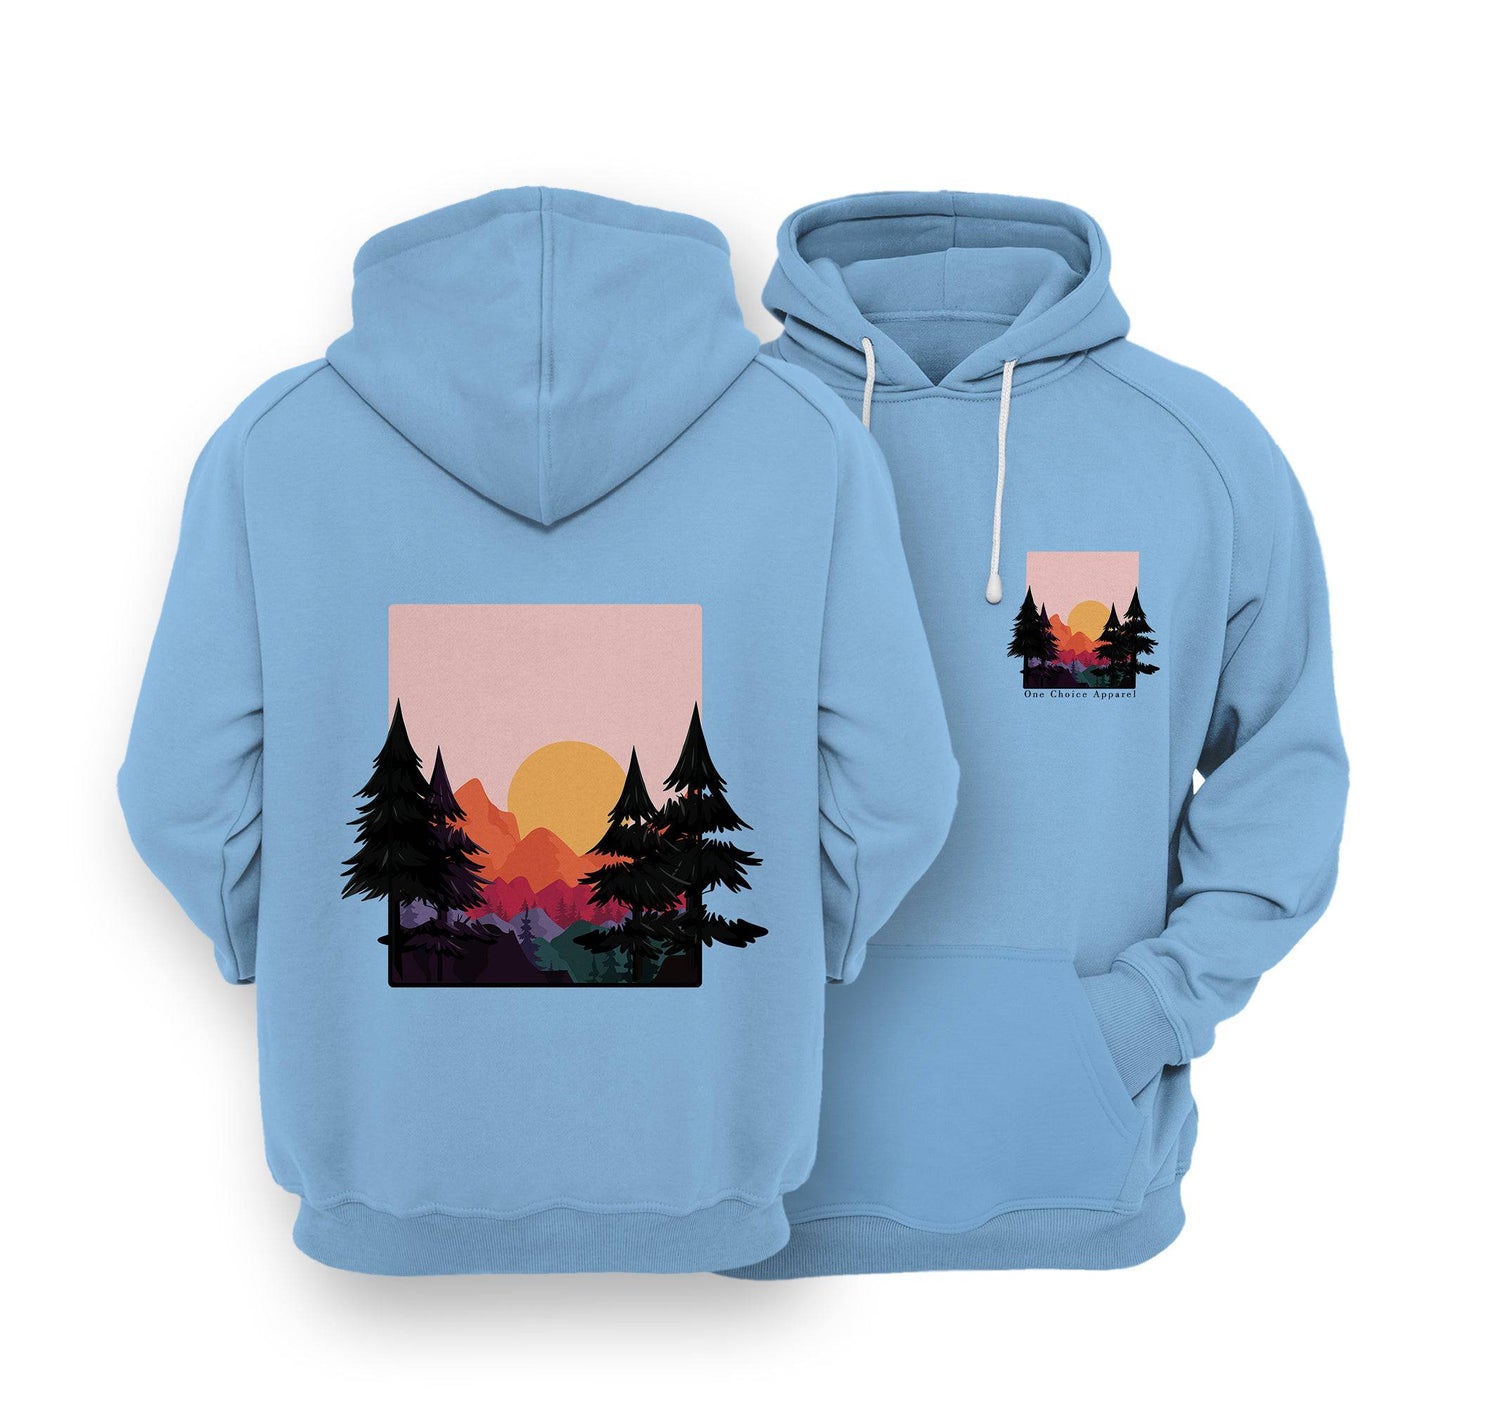 Sustainable Hoodie - Sun & Mountains - One Choice Apparel